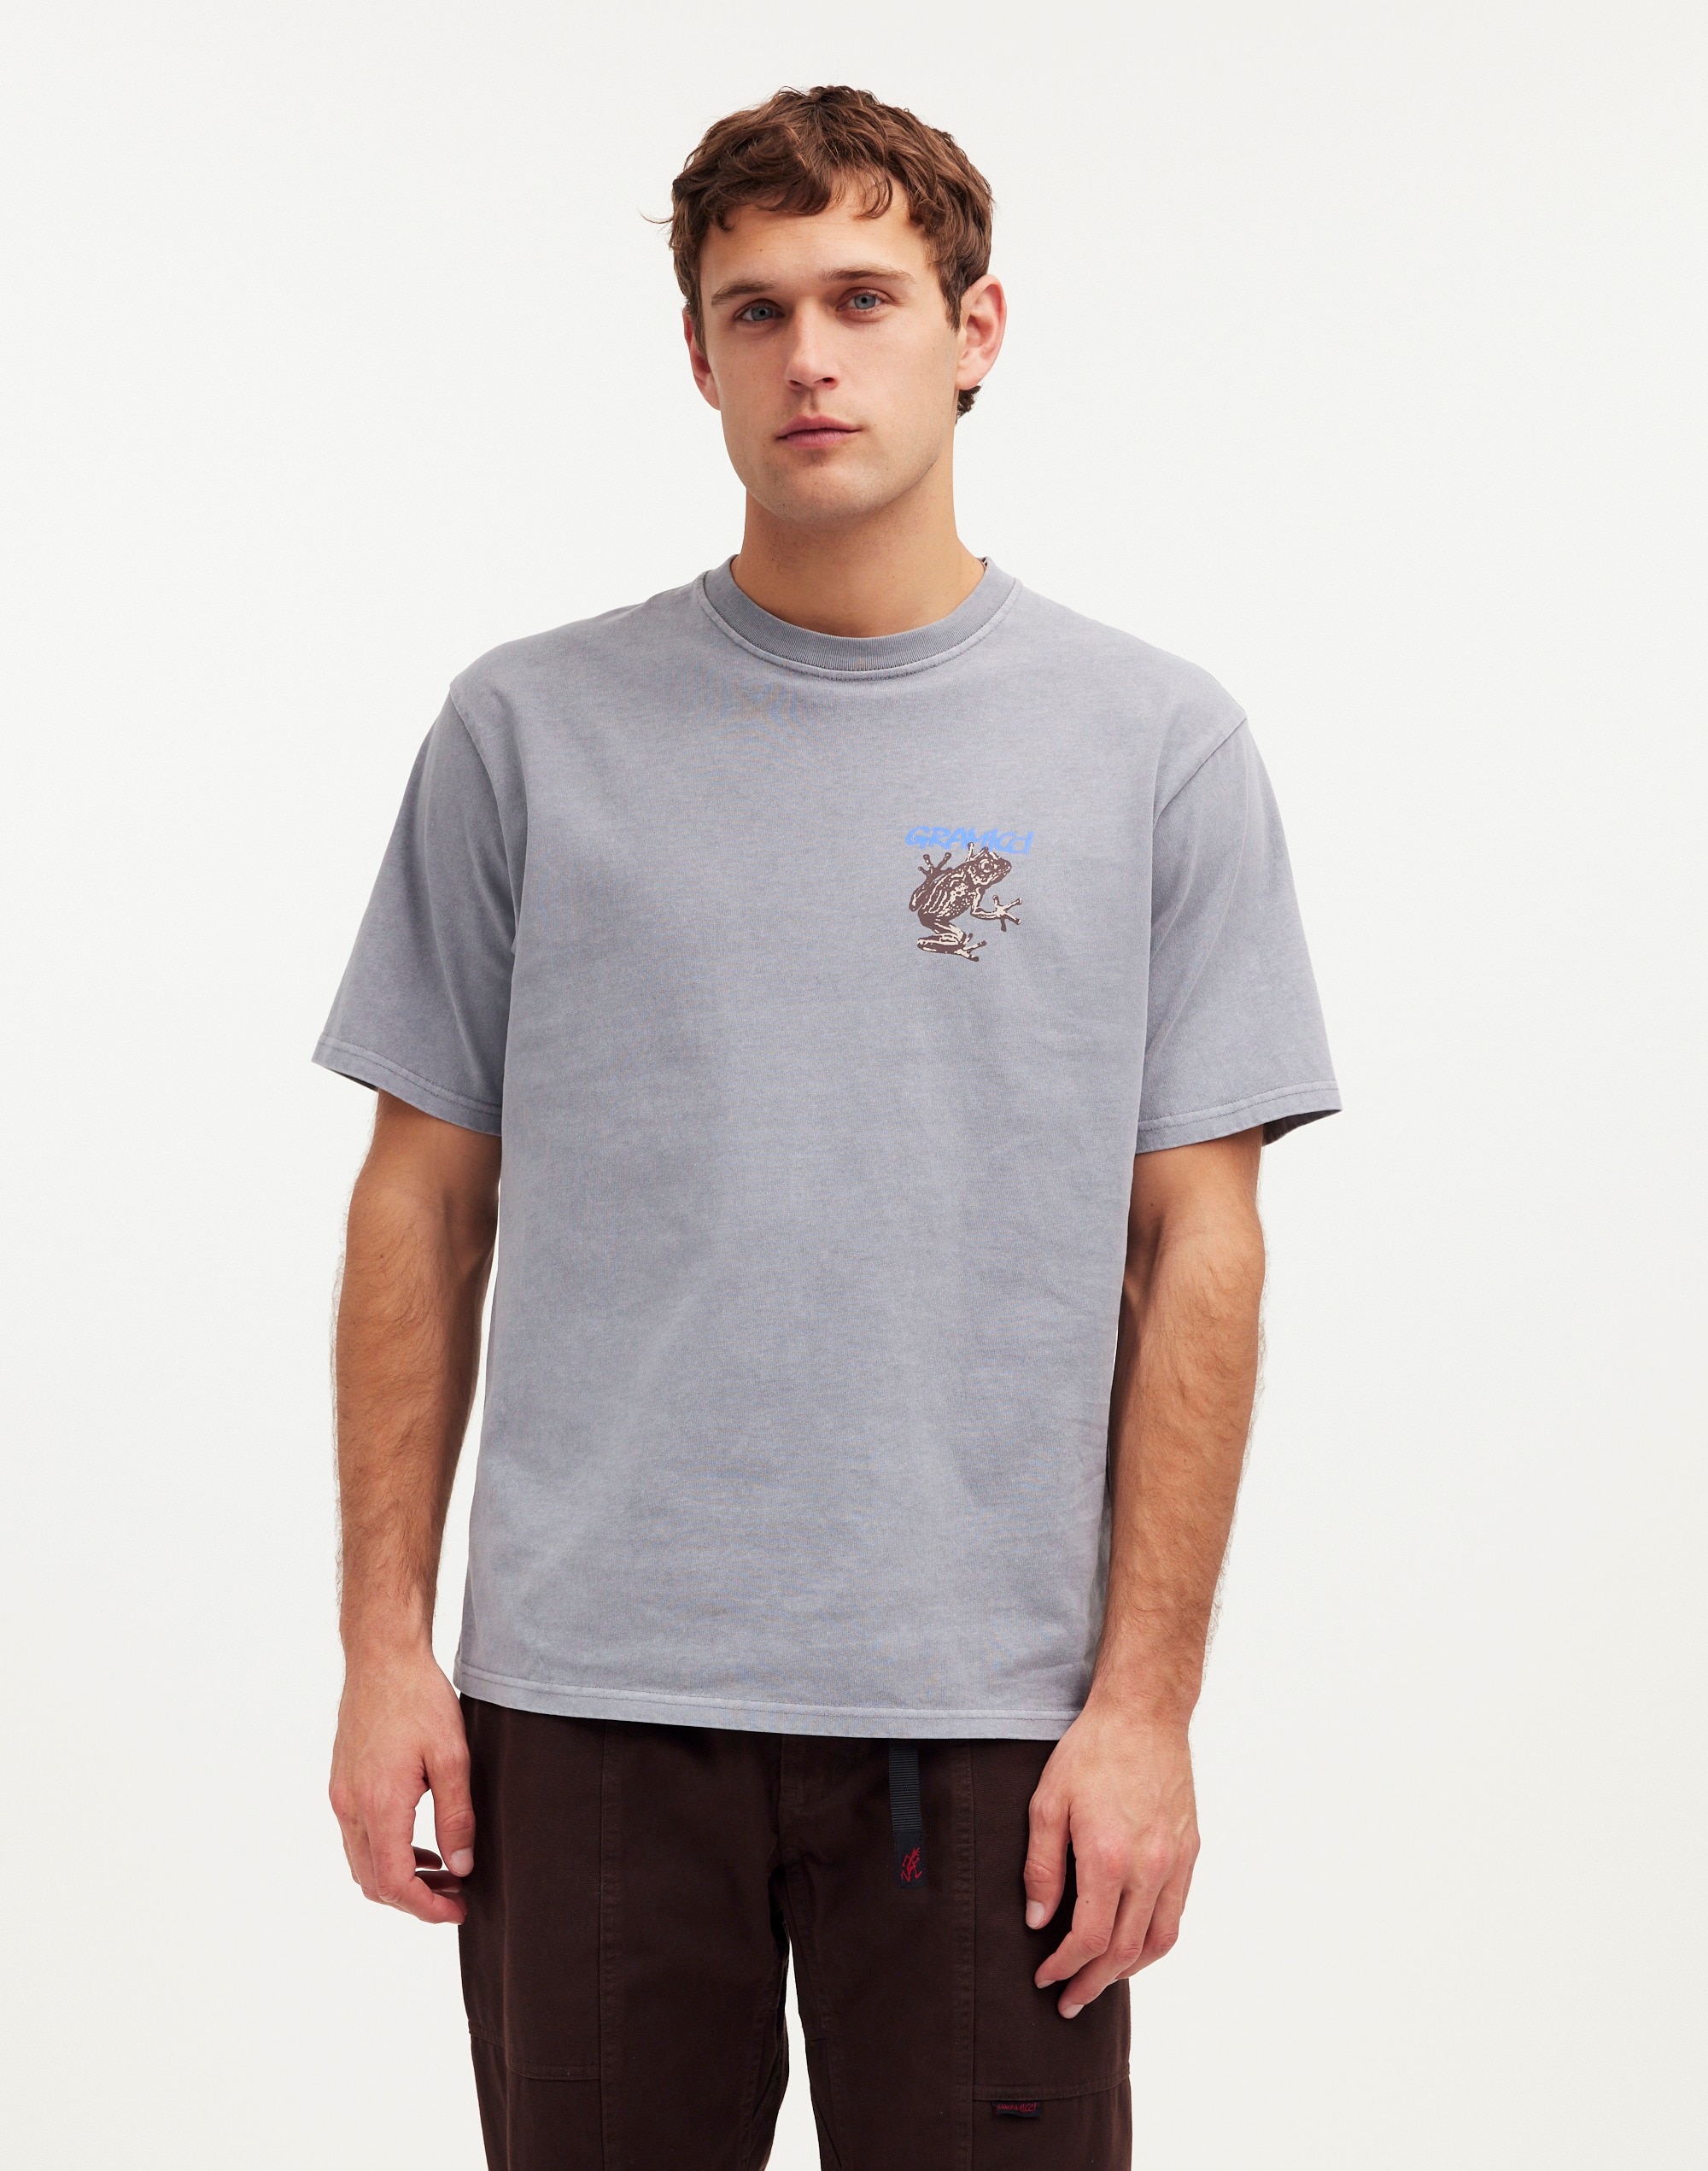 Gramicci® Sticky Frog Graphic Tee